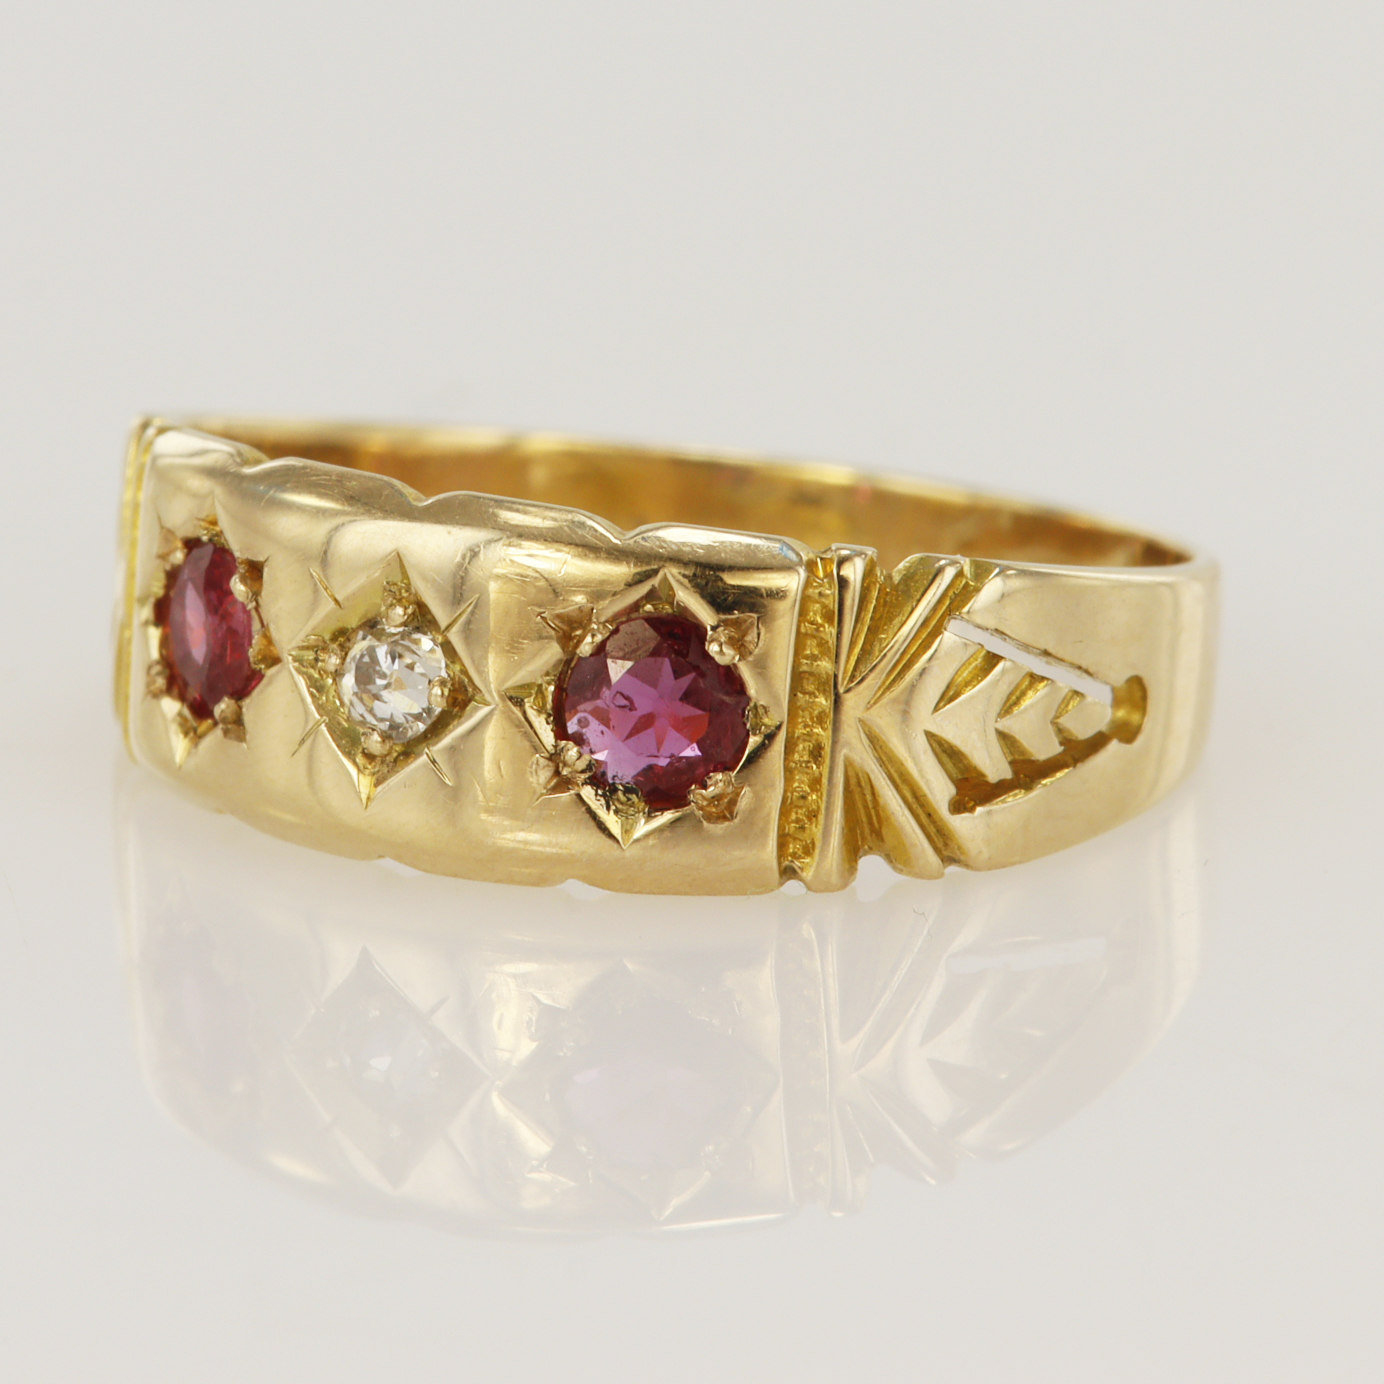 Yellow gold (tests 18ct) antique diamond and ruby ring, one old cut diamond approx. 0.03ct, two